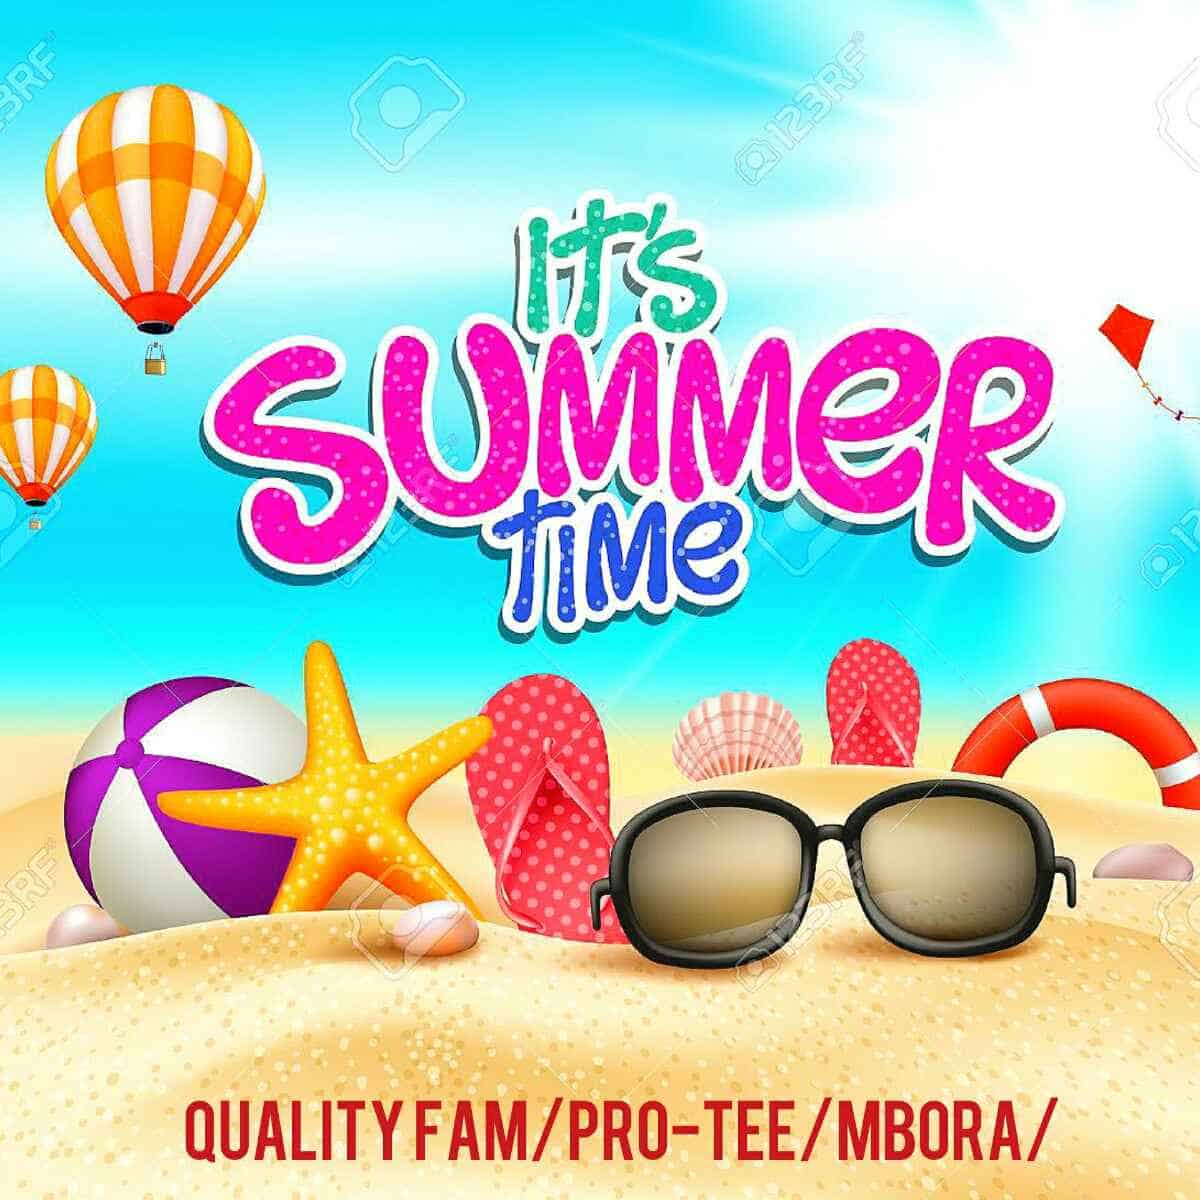 Pro Tee, Quality Fam & Mbora – Summer Time (Heaven Or Hell 2)